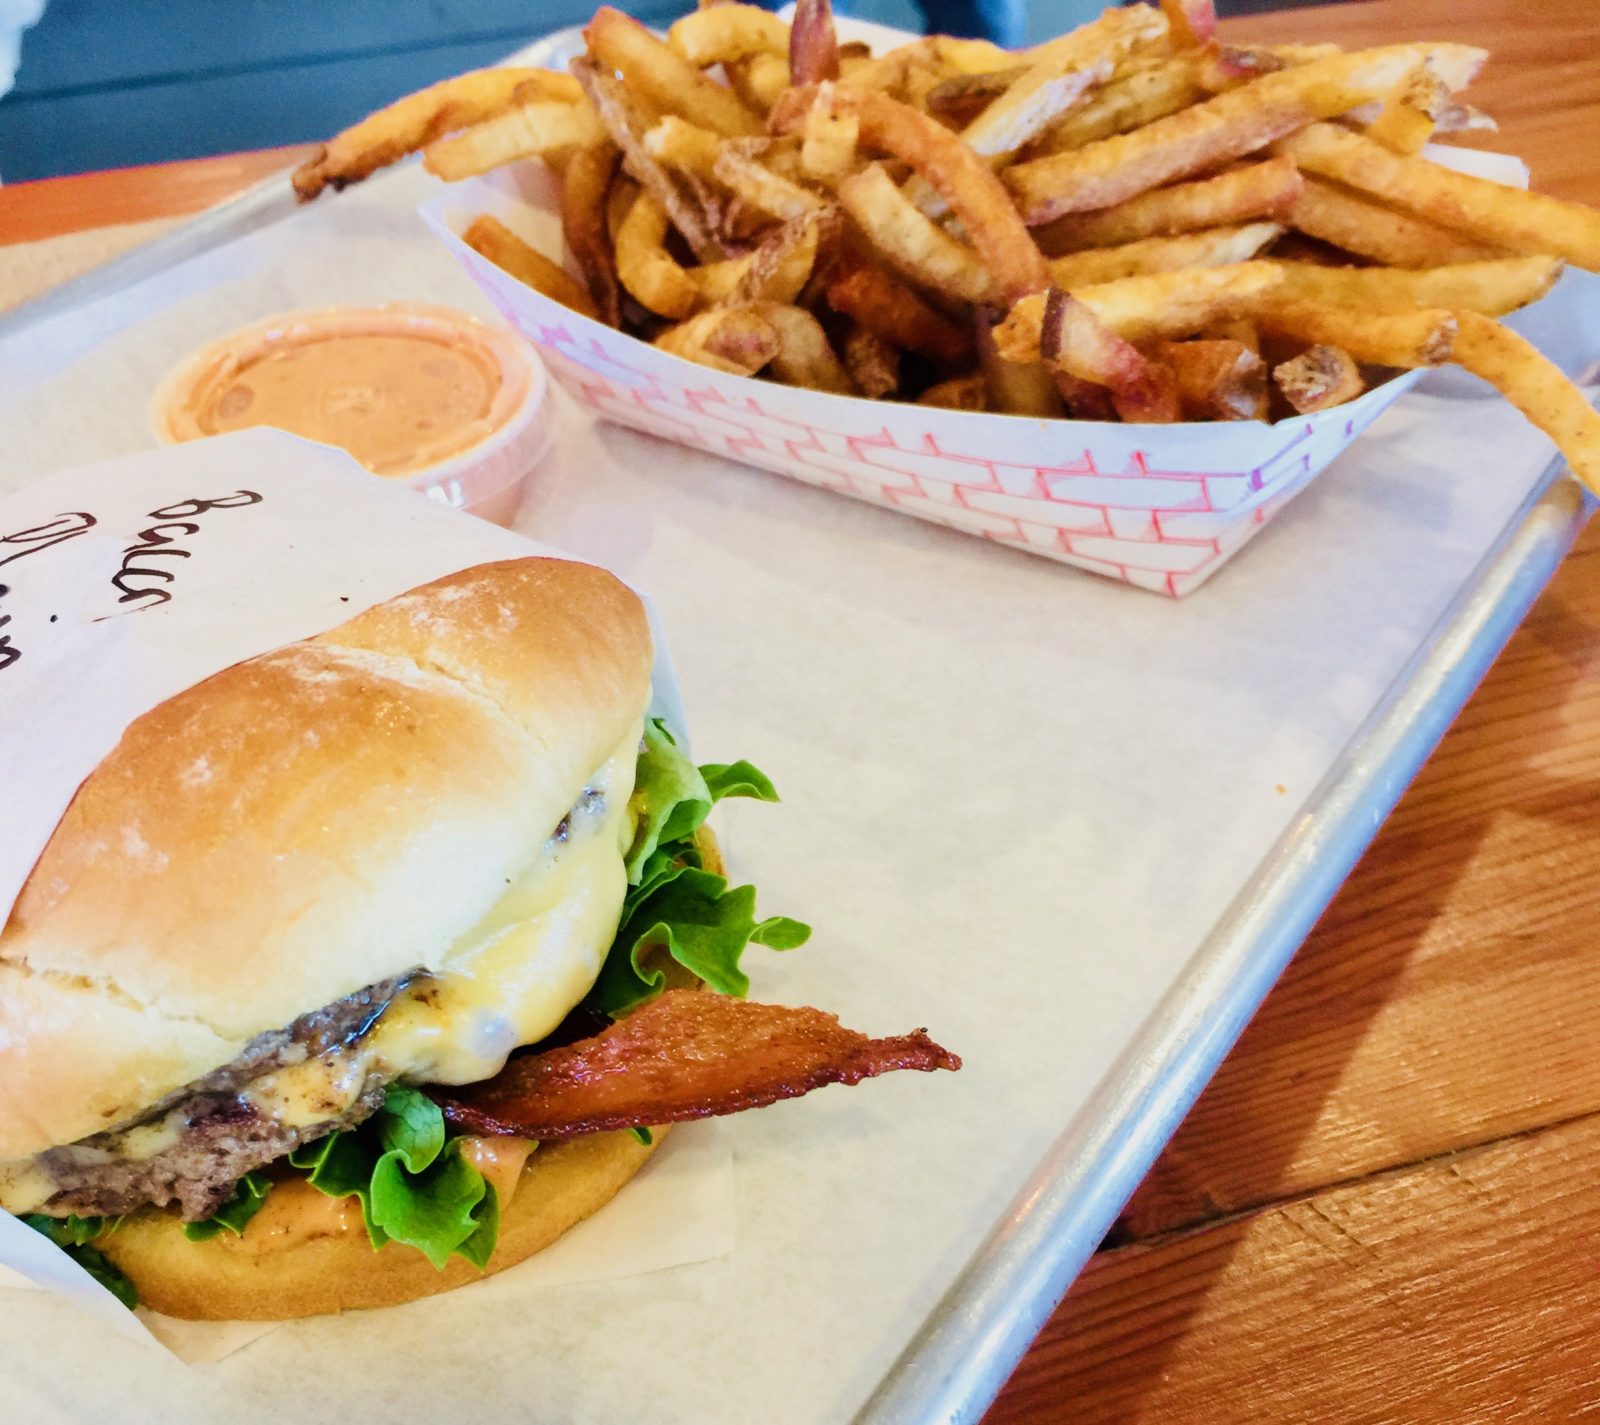 Pick of the Week - The Stand - Standard Cheeseburger with Fries